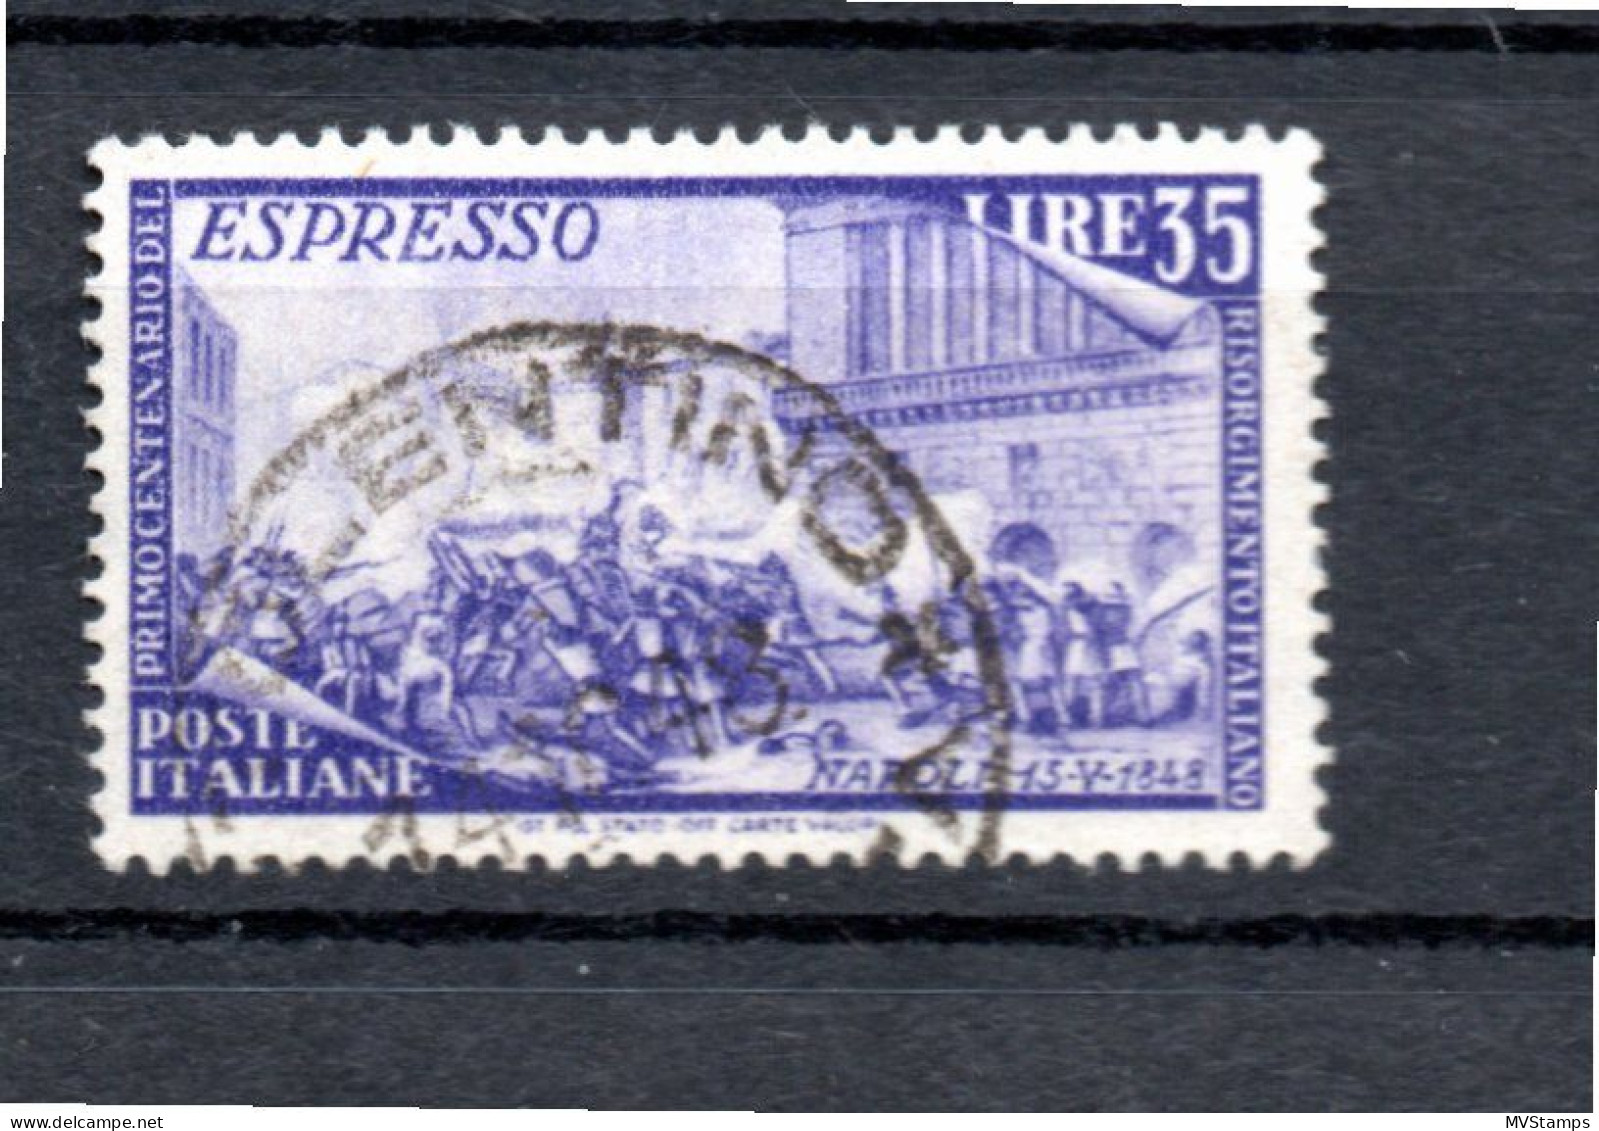 Italy 1948 Old Battle Of Napels (Express) Stamp (Michel 760) Used - Used